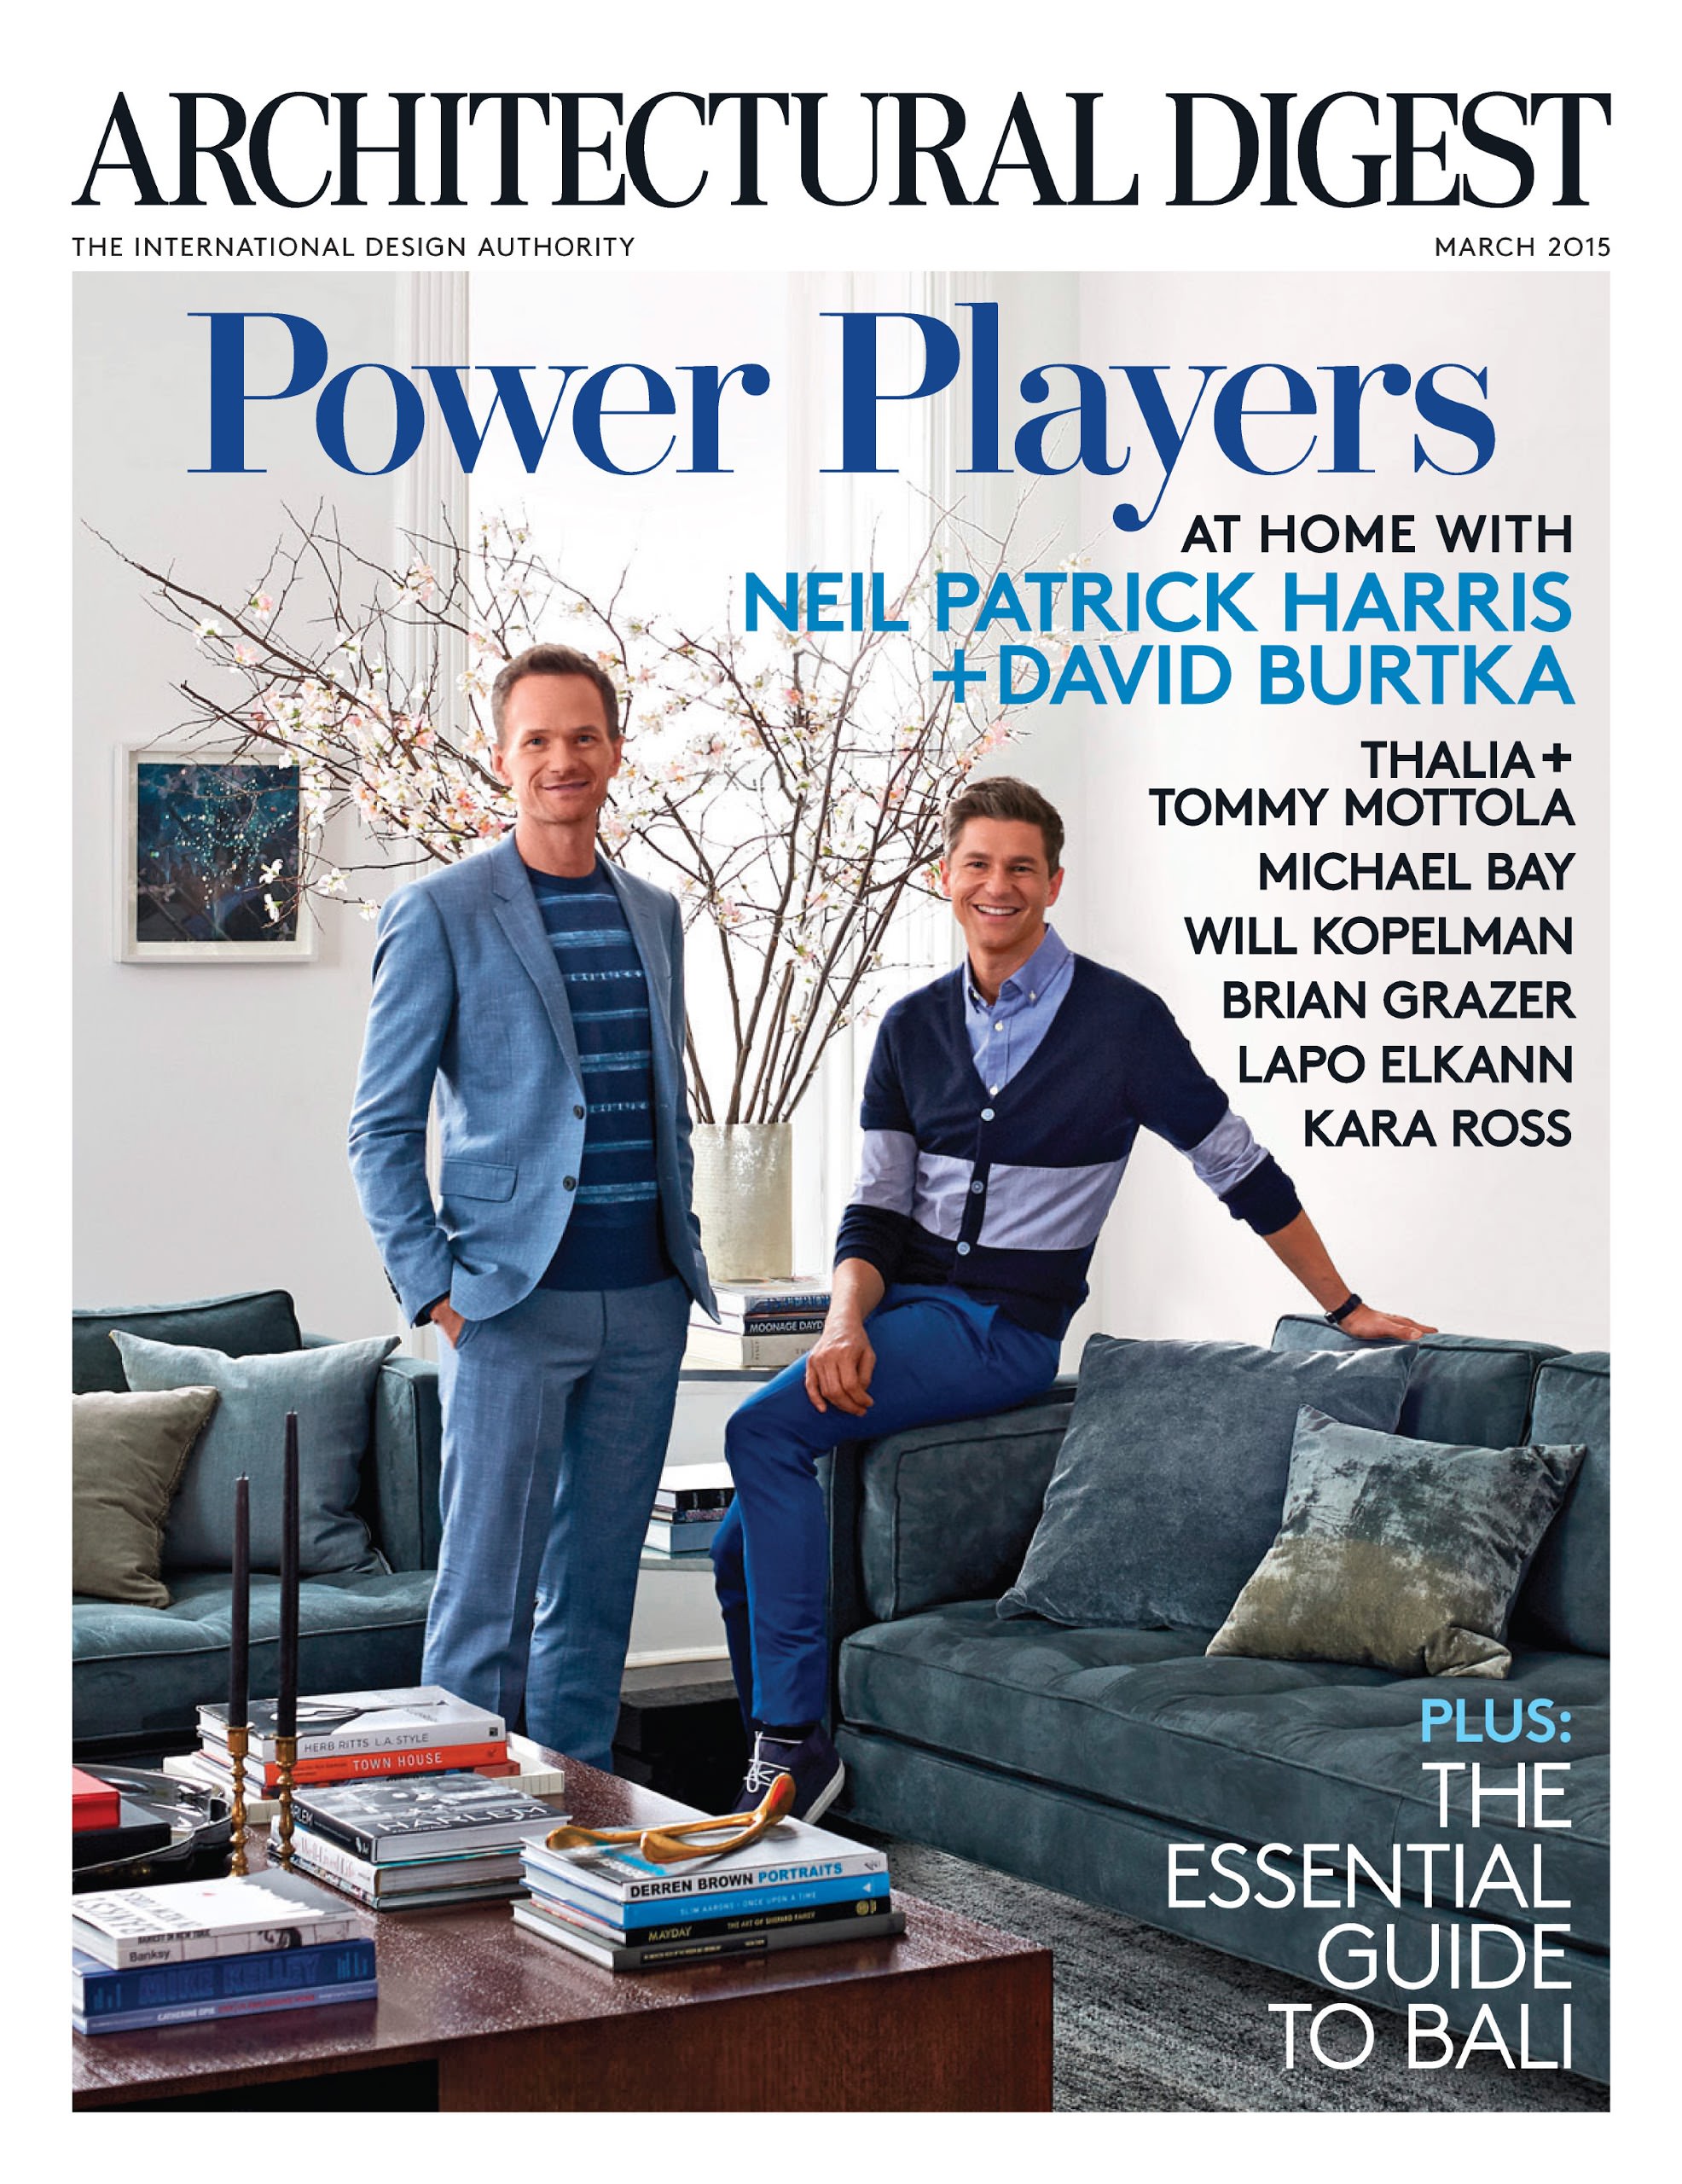 Architectural Digest. March 2015.